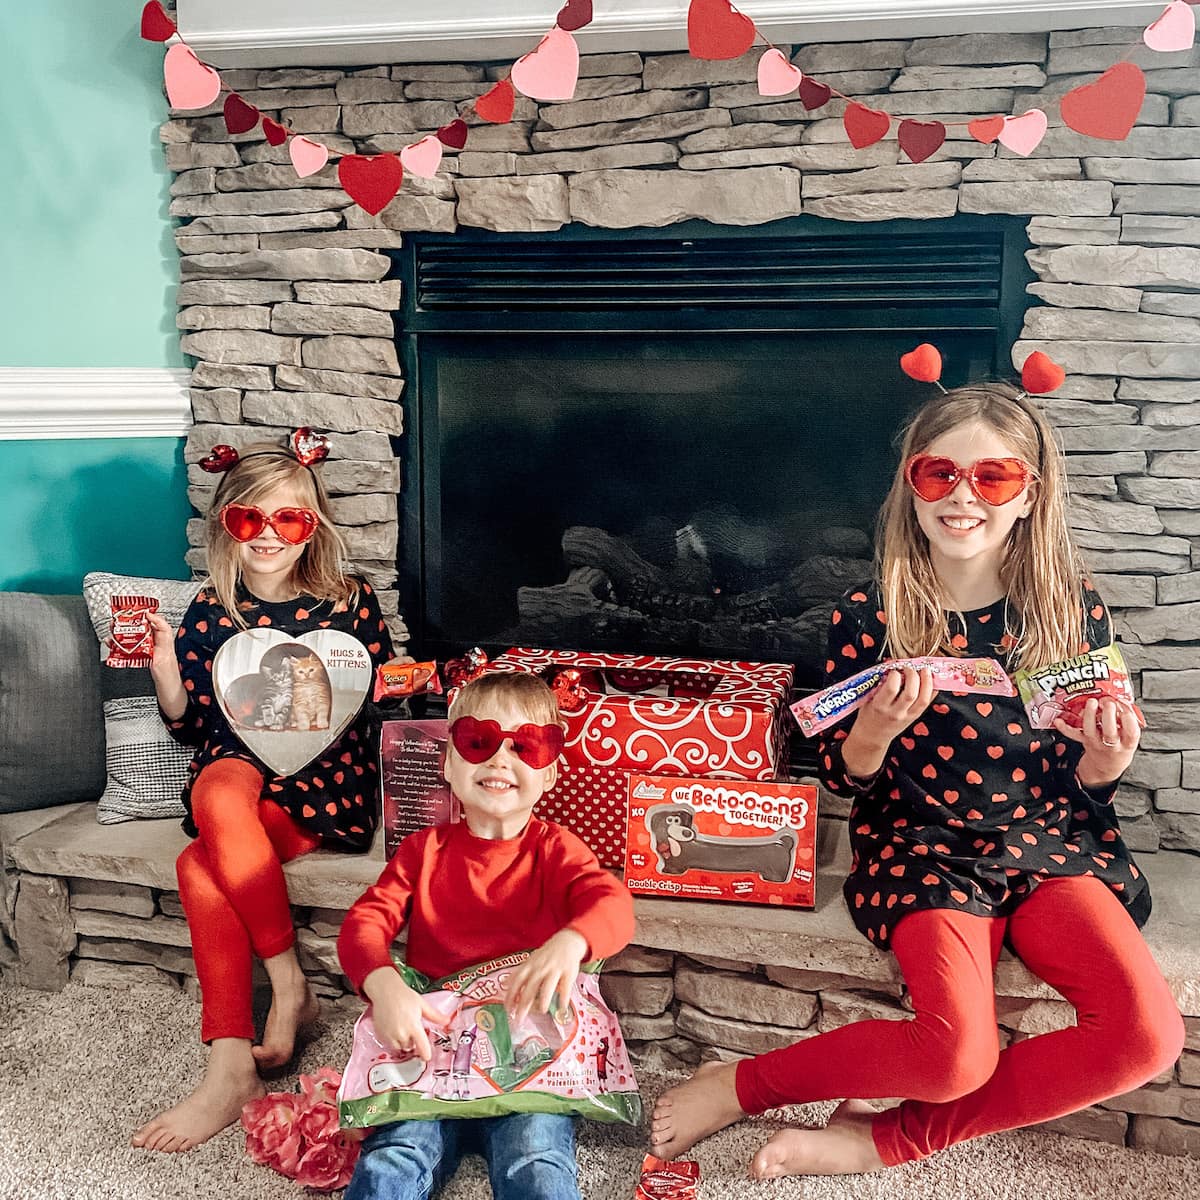 Check out the best Valentine's gifts for kids and make their V-Day extra special: cute, affordable gifts for boys, girls, and every kid!